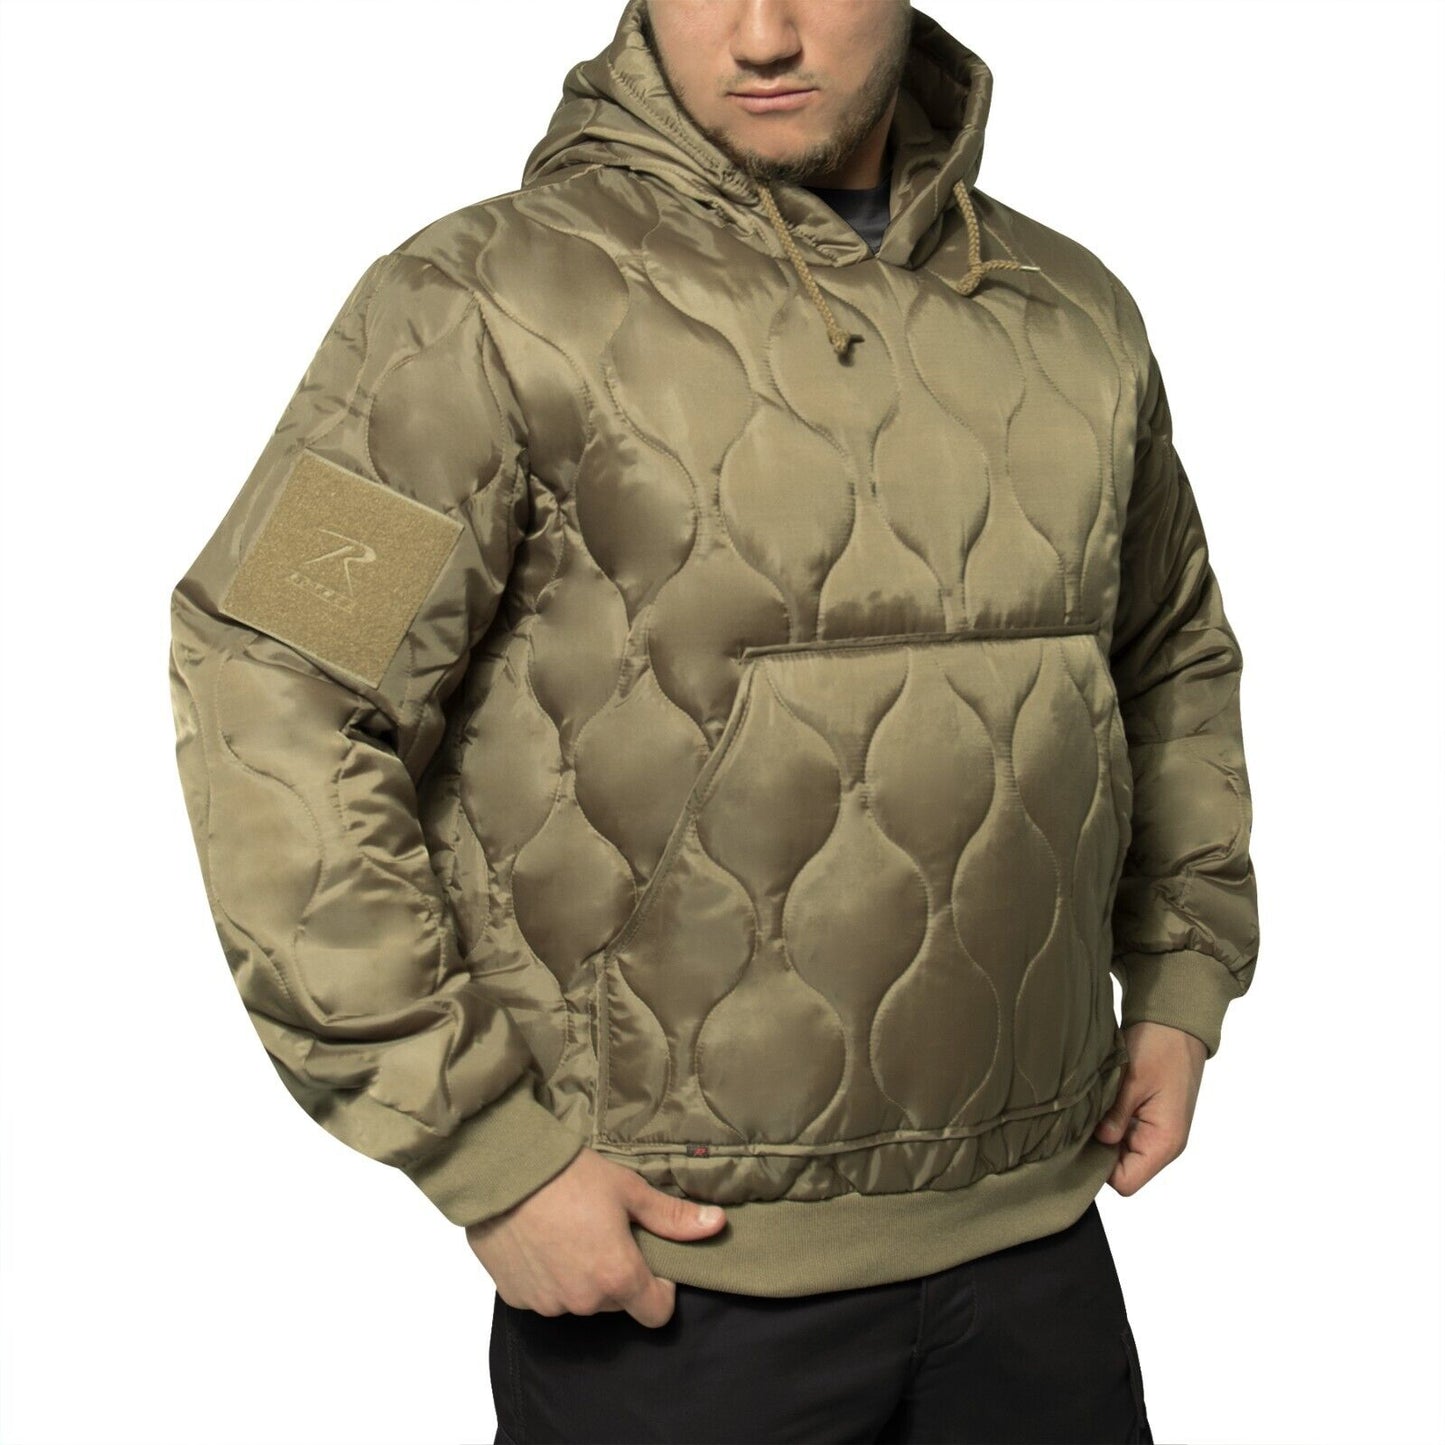 Men's Quilted Woobie Hoodie Sweatshirt With US Flag Patch